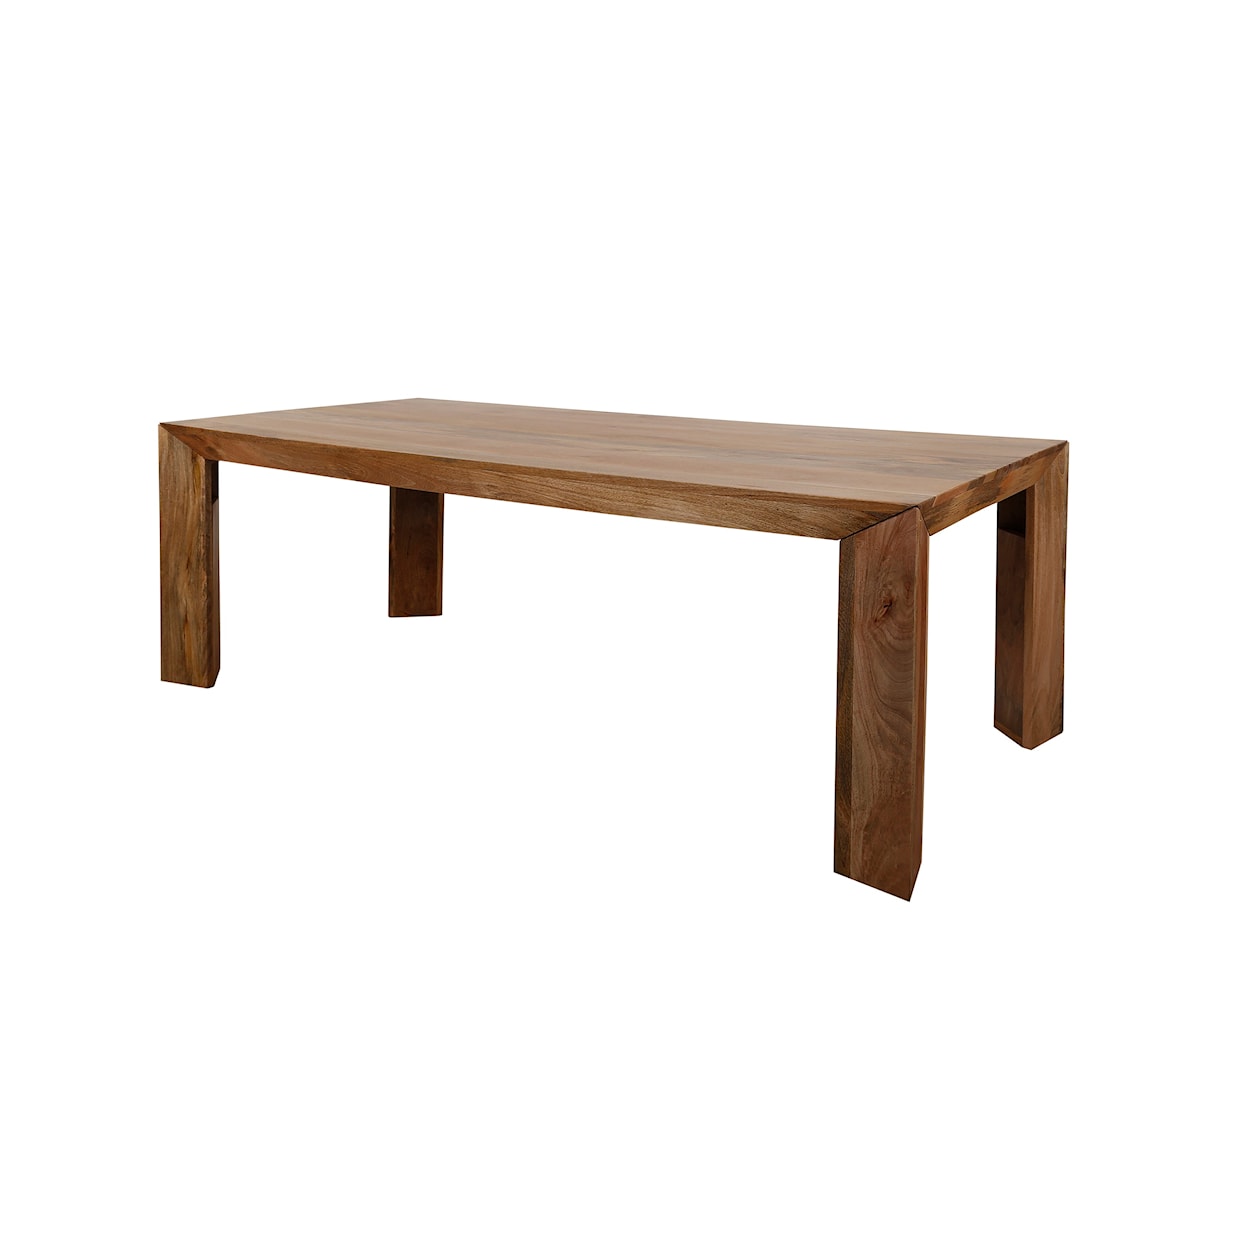 Paramount Furniture Crossings Downtown Dining Table